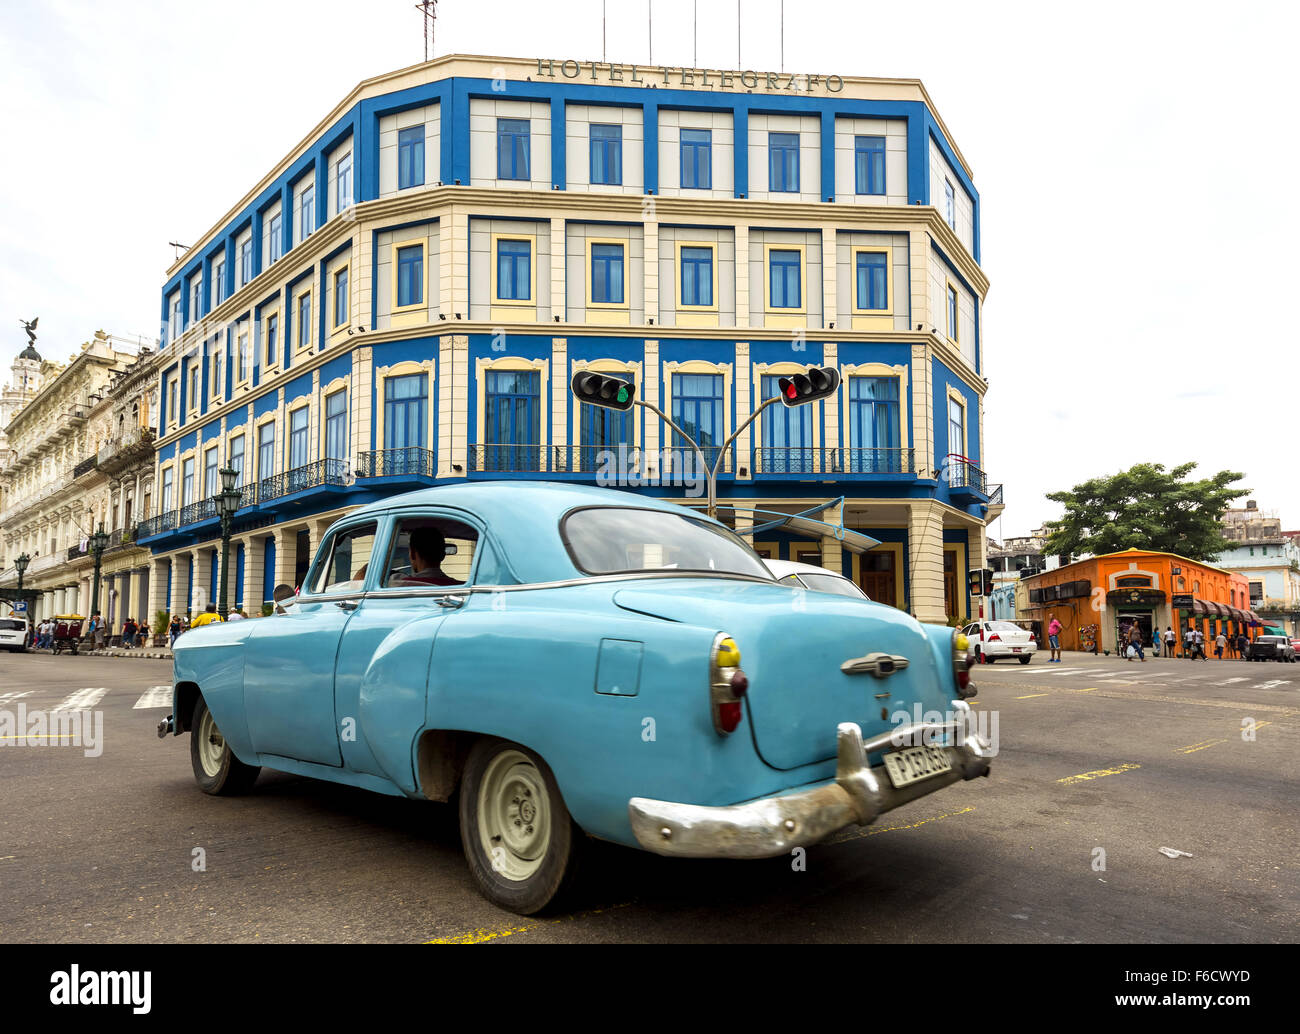 Teal Oldtimer in the street scene, turquoise, old American road cruiser on the streets of Havana, Taxi, Hotel Telegrafo Stock Photo